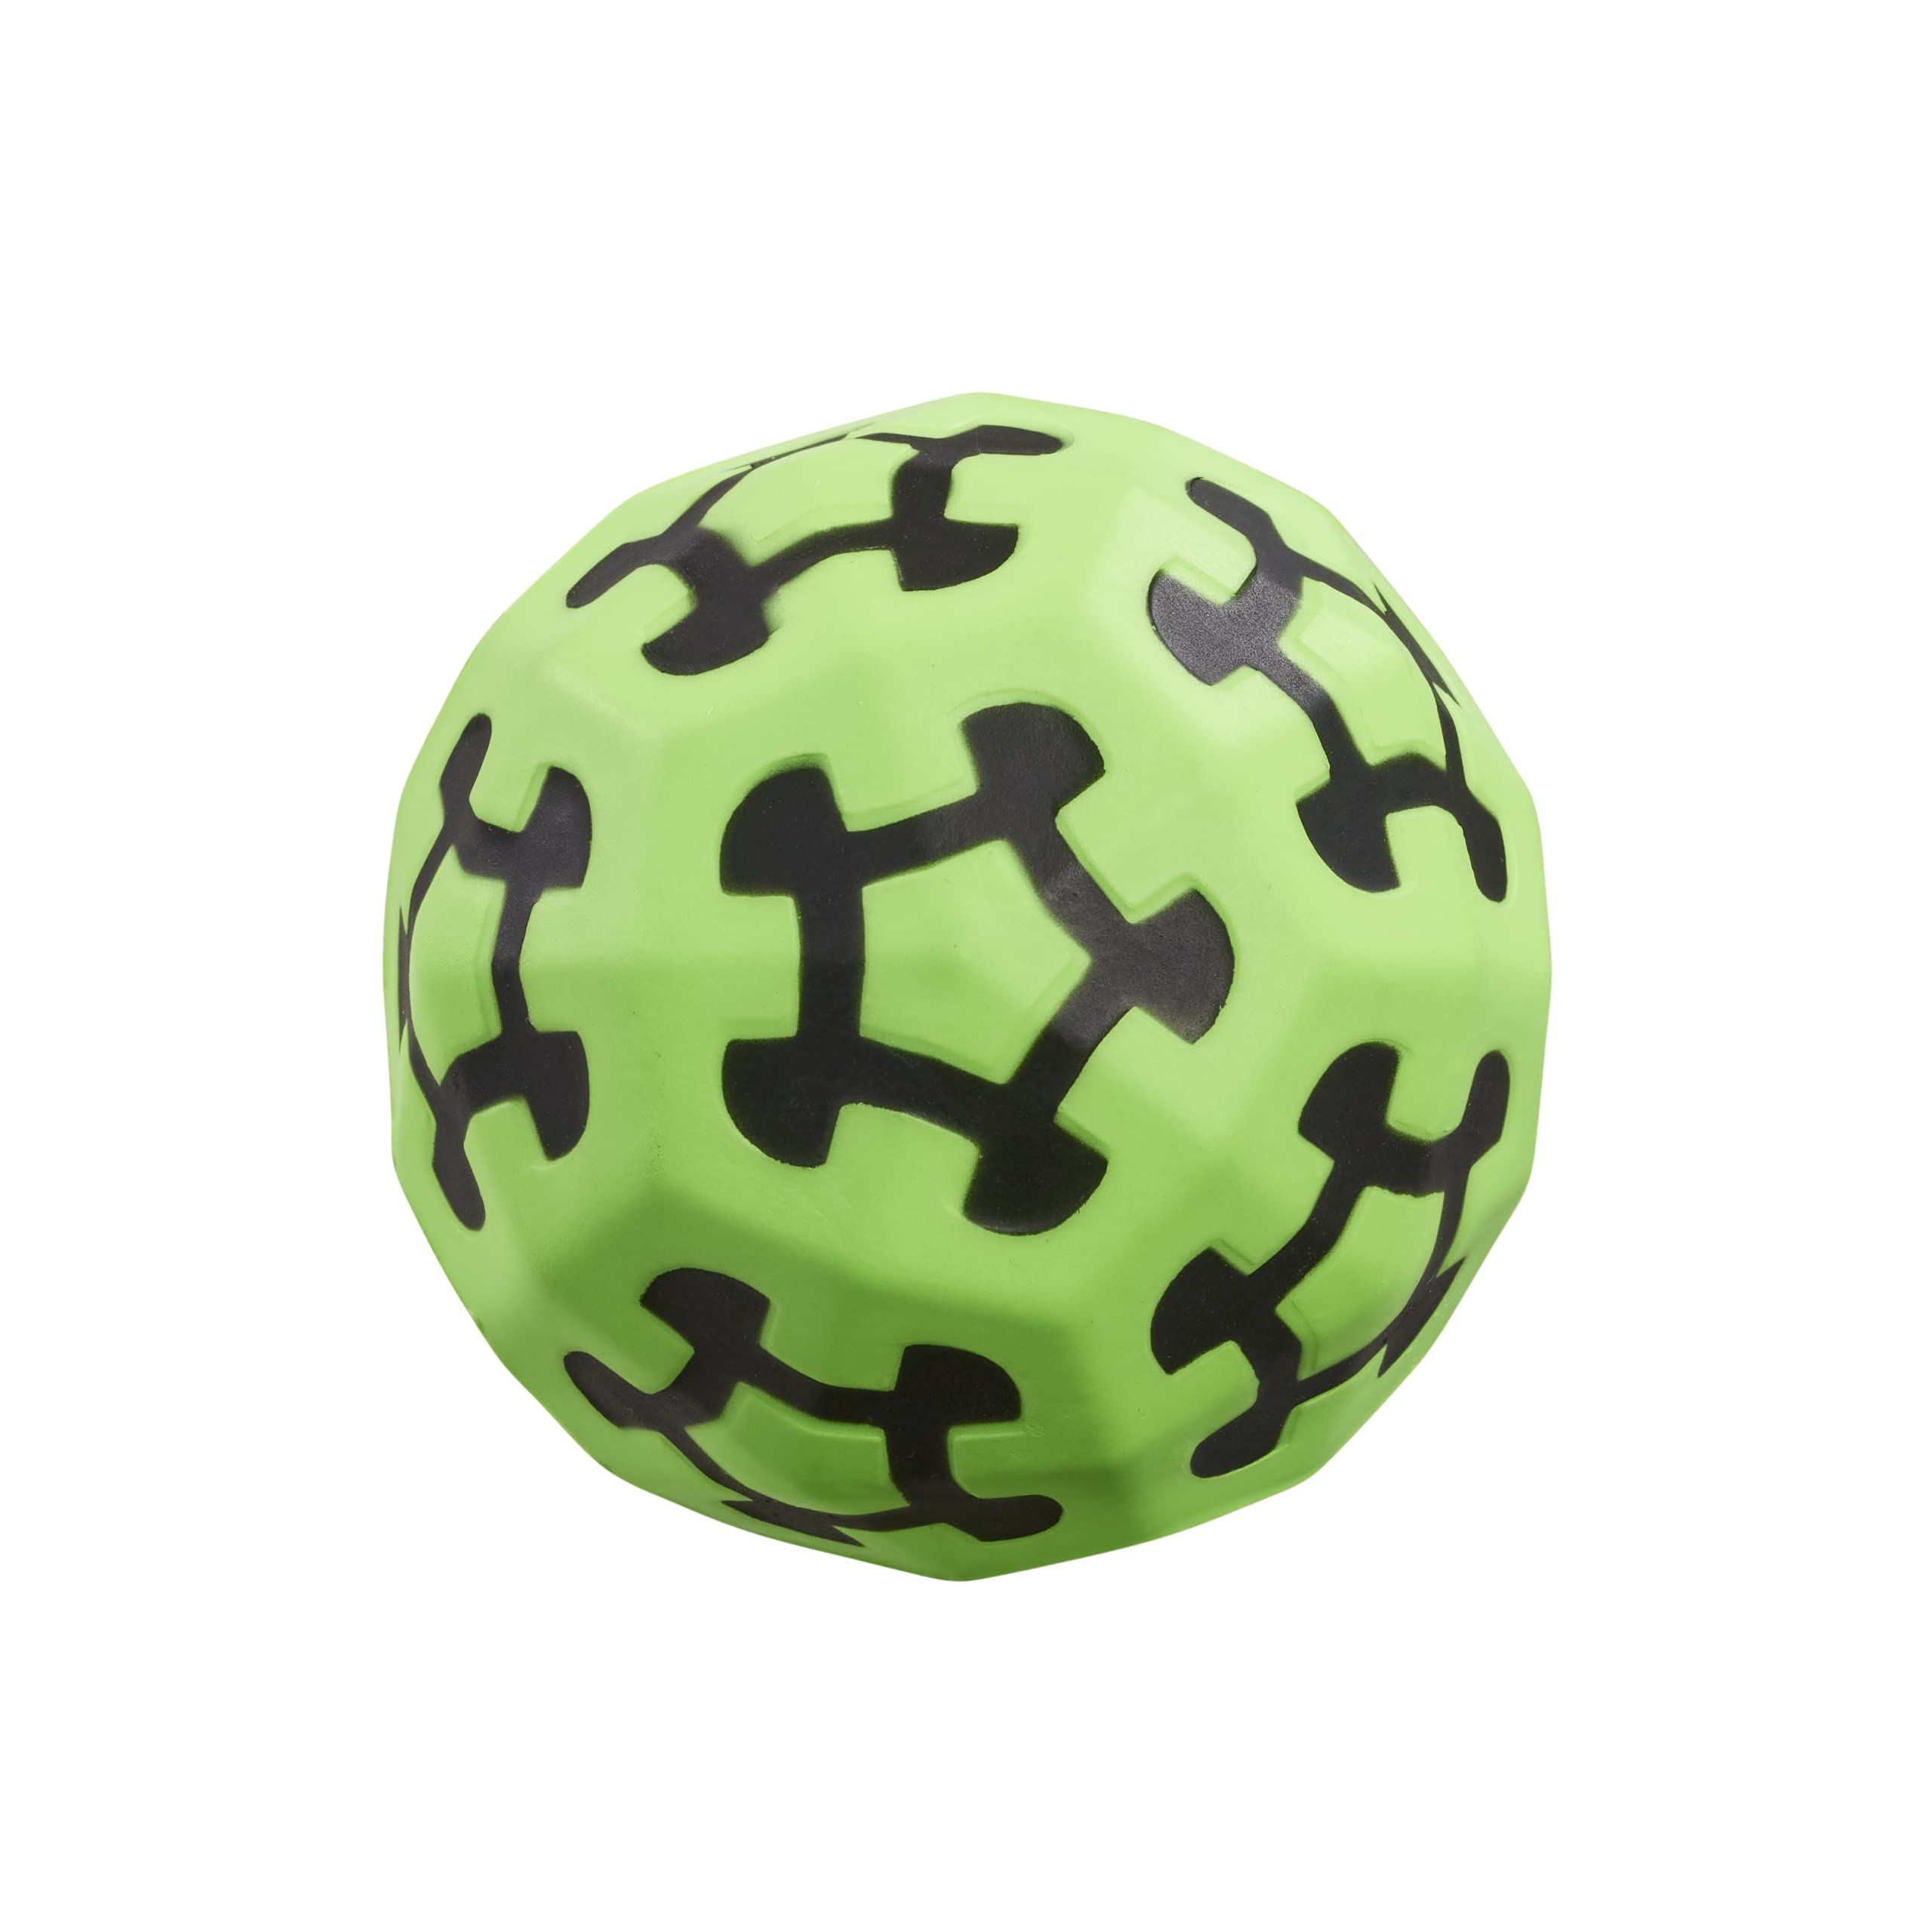 2.7" Wahu Sonic Shock Ultra-Bounce Ball (Green) $3.72 + Free Shipping w/ Prime or on $35+